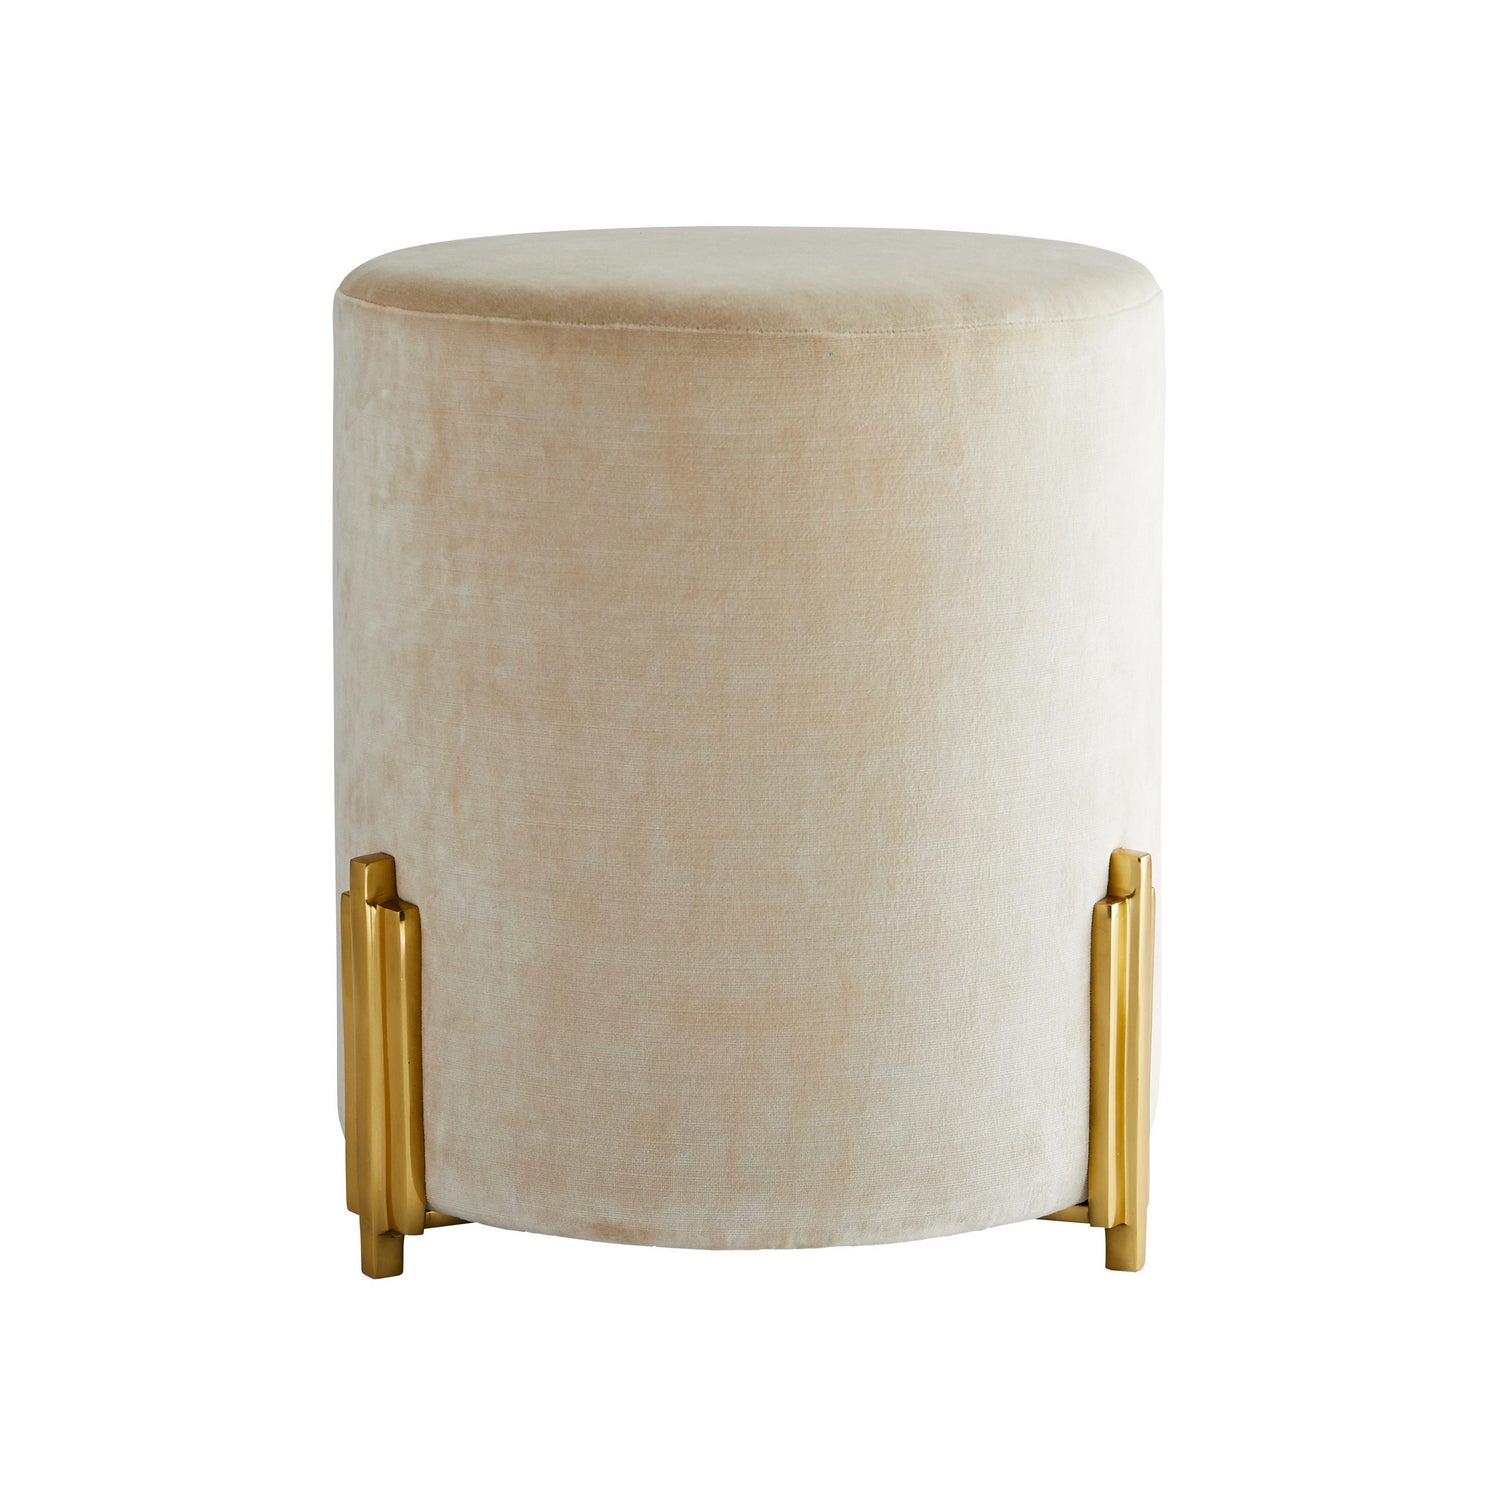 Ottoman from the Warby collection in Sterling Velvet finish